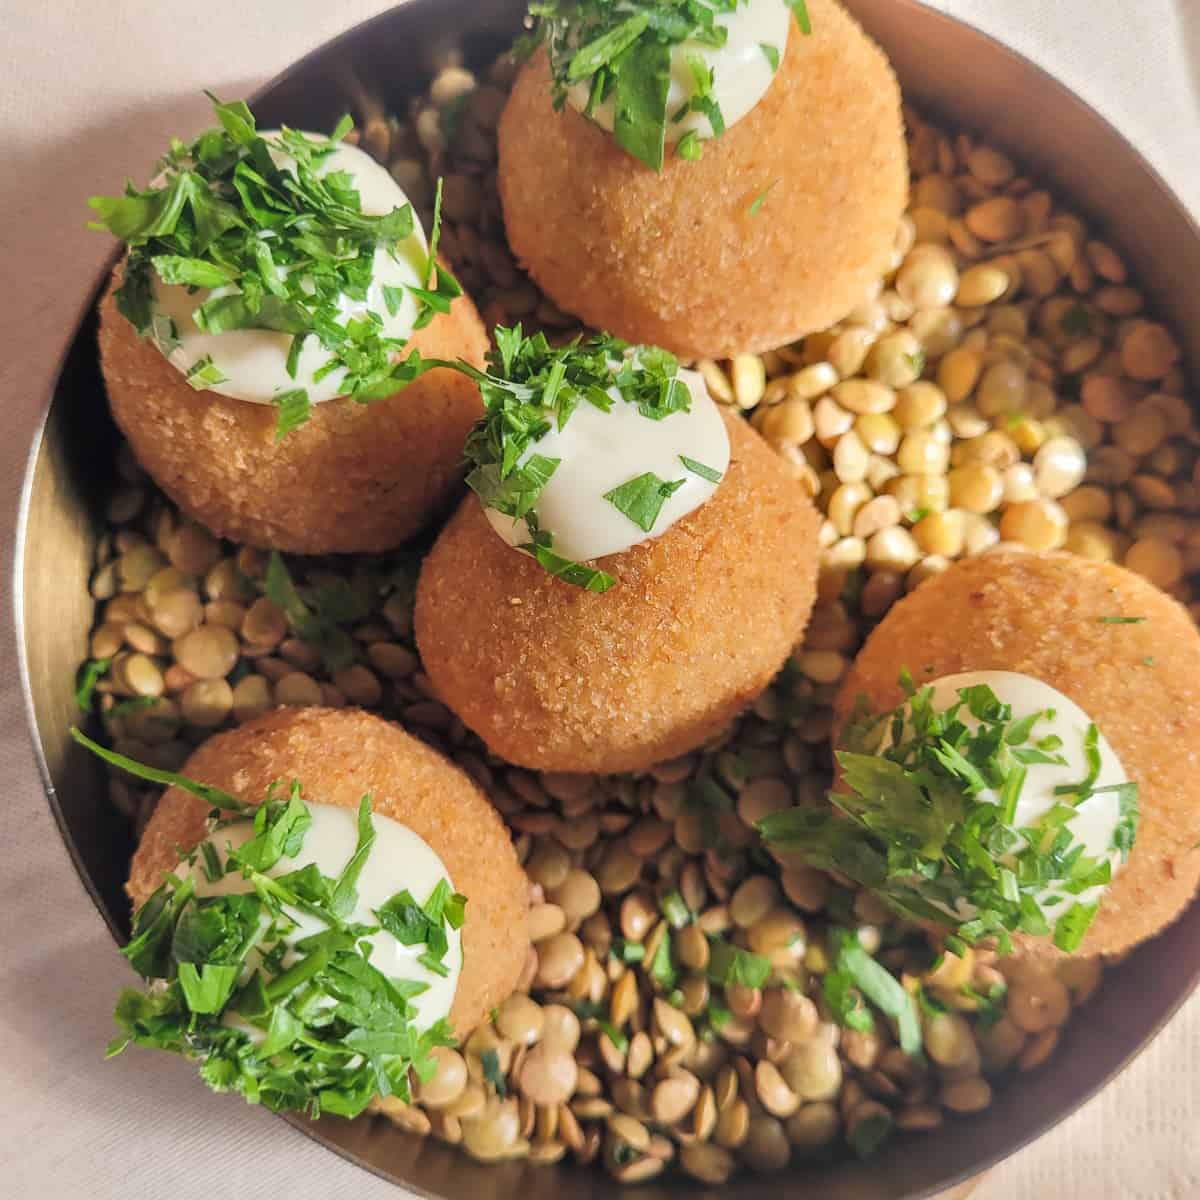 Rice balls on top of lentils in a bowl